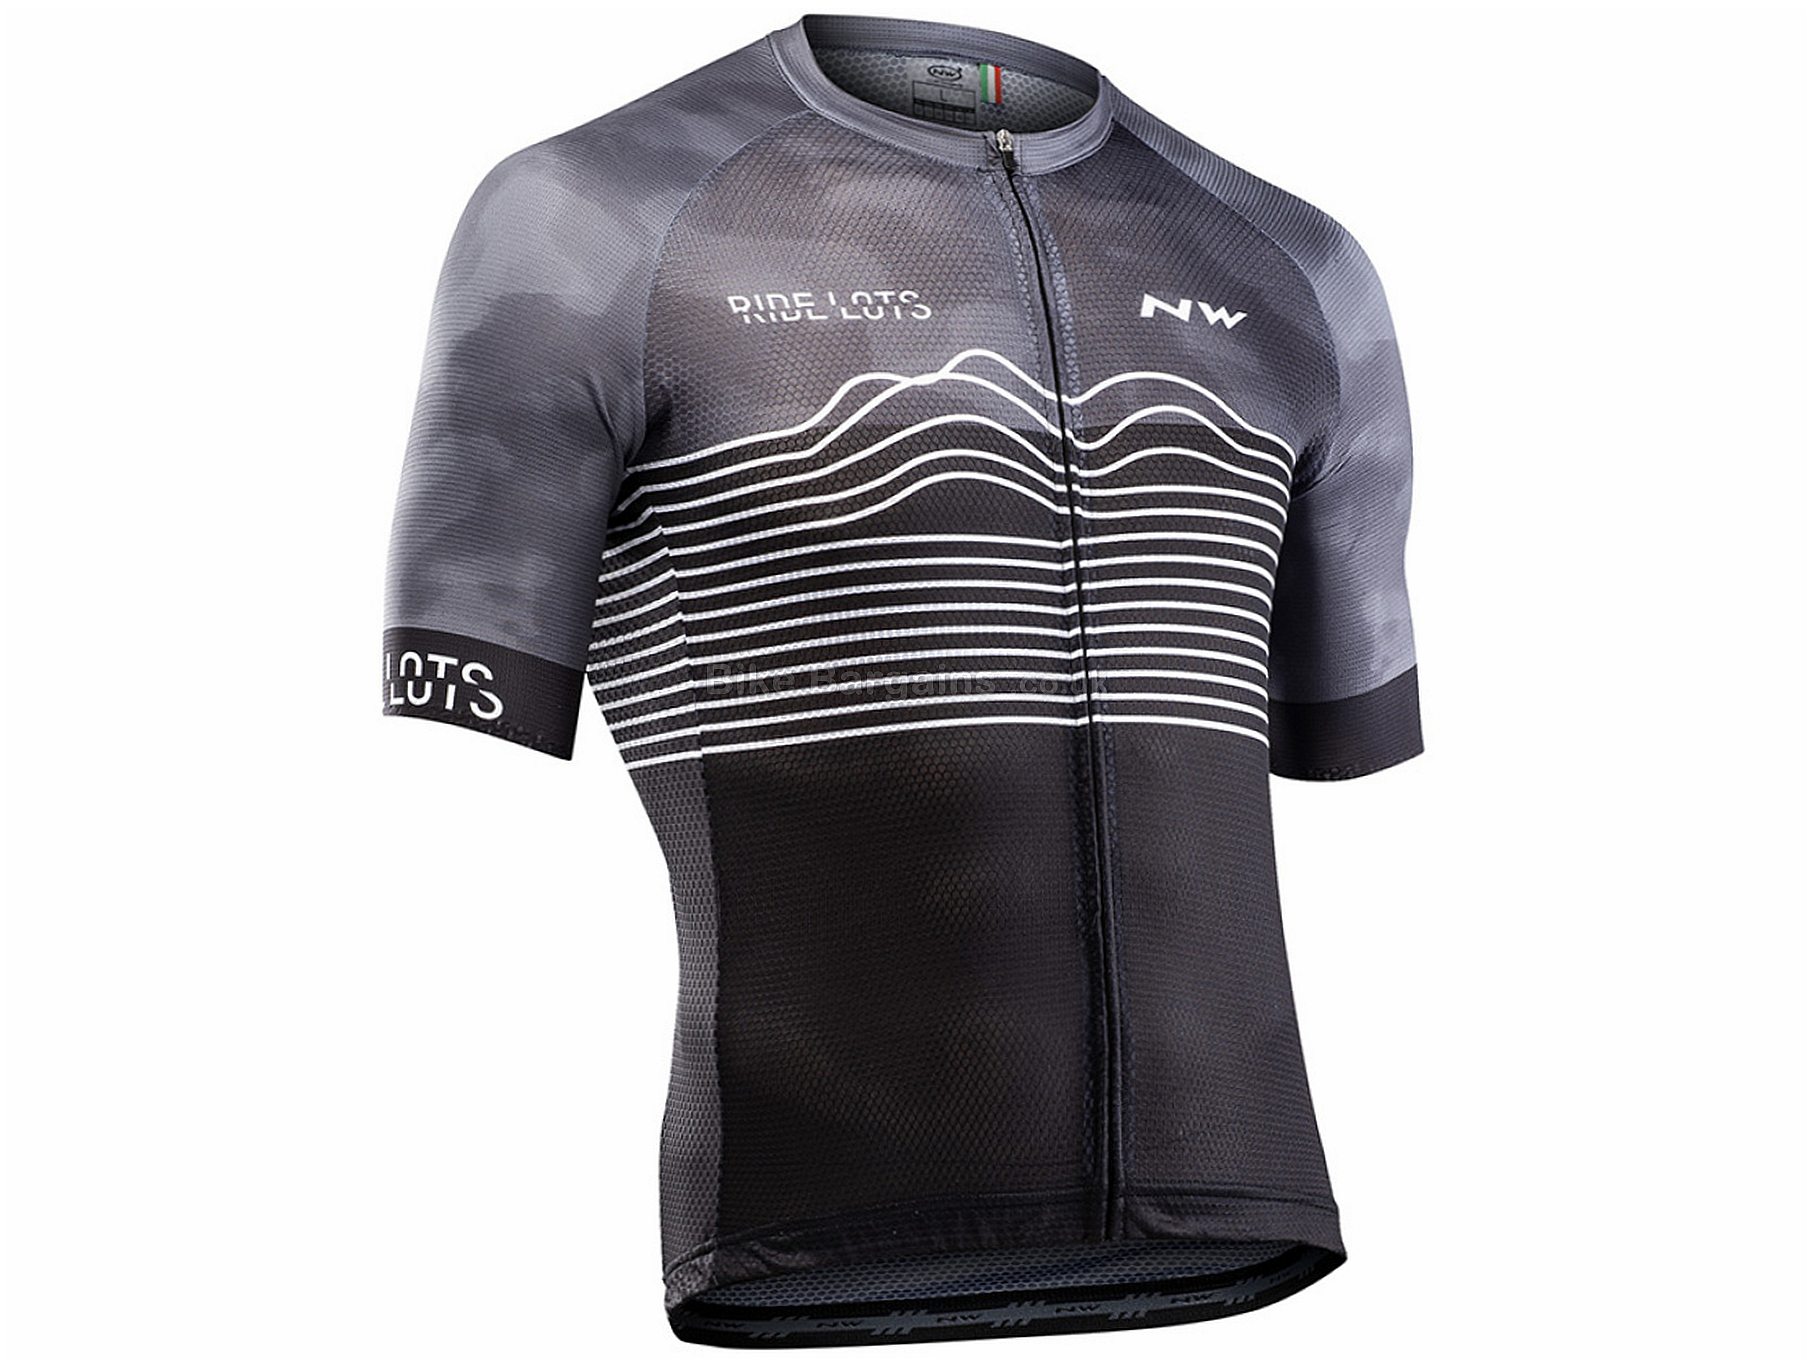 Northwave Blade Air Short Sleeve Jersey (Expired) was £29